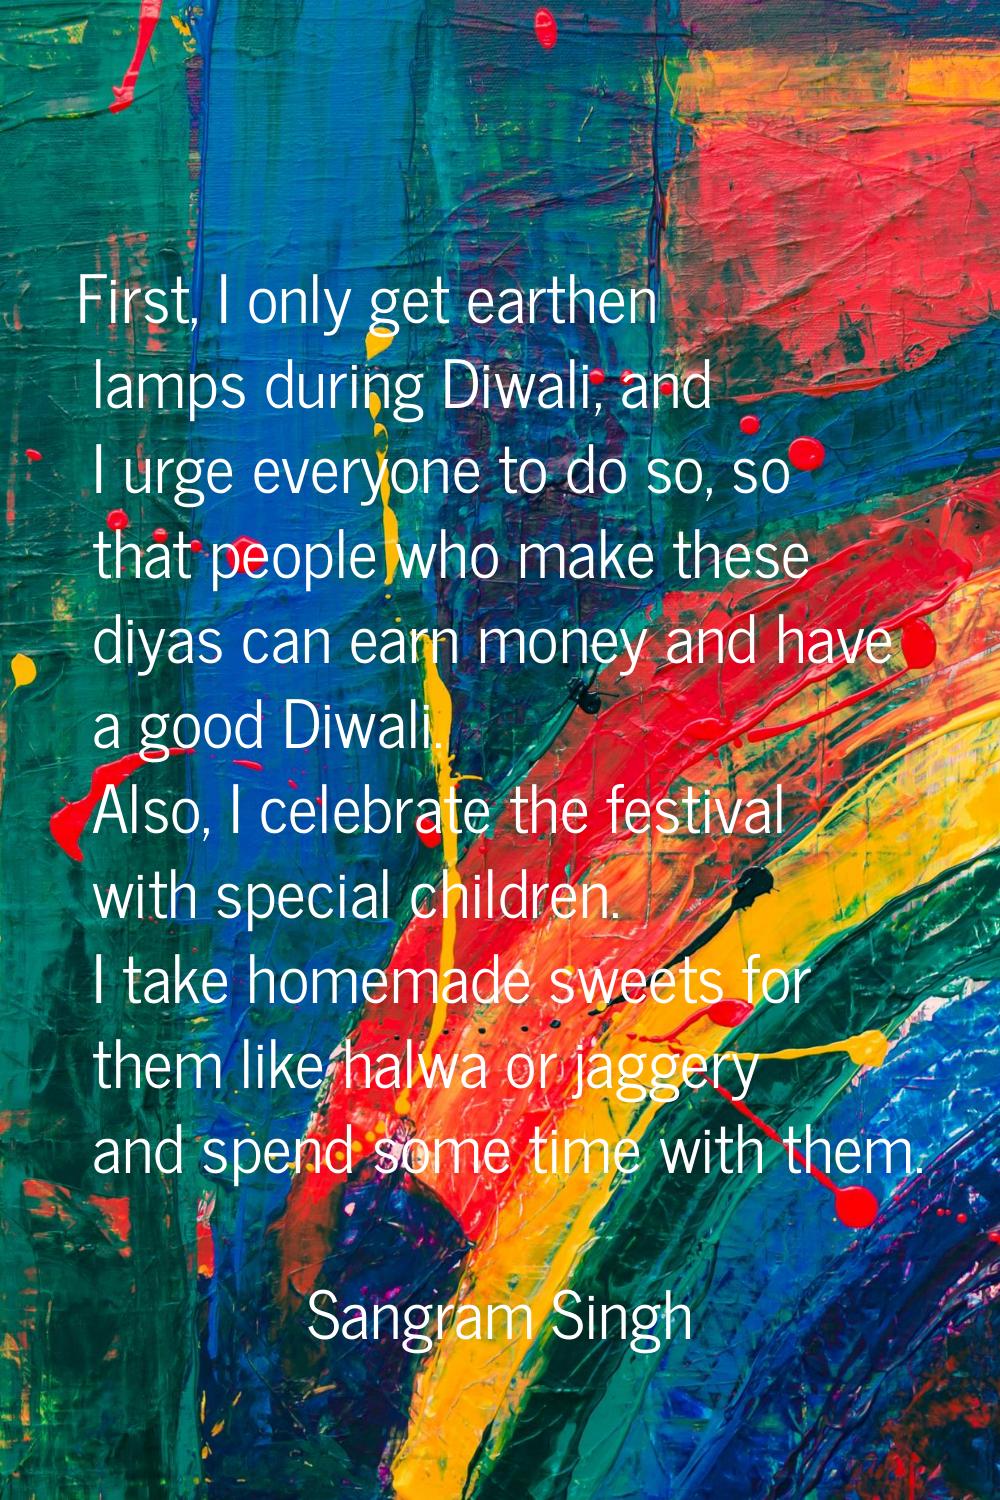 First, I only get earthen lamps during Diwali, and I urge everyone to do so, so that people who mak